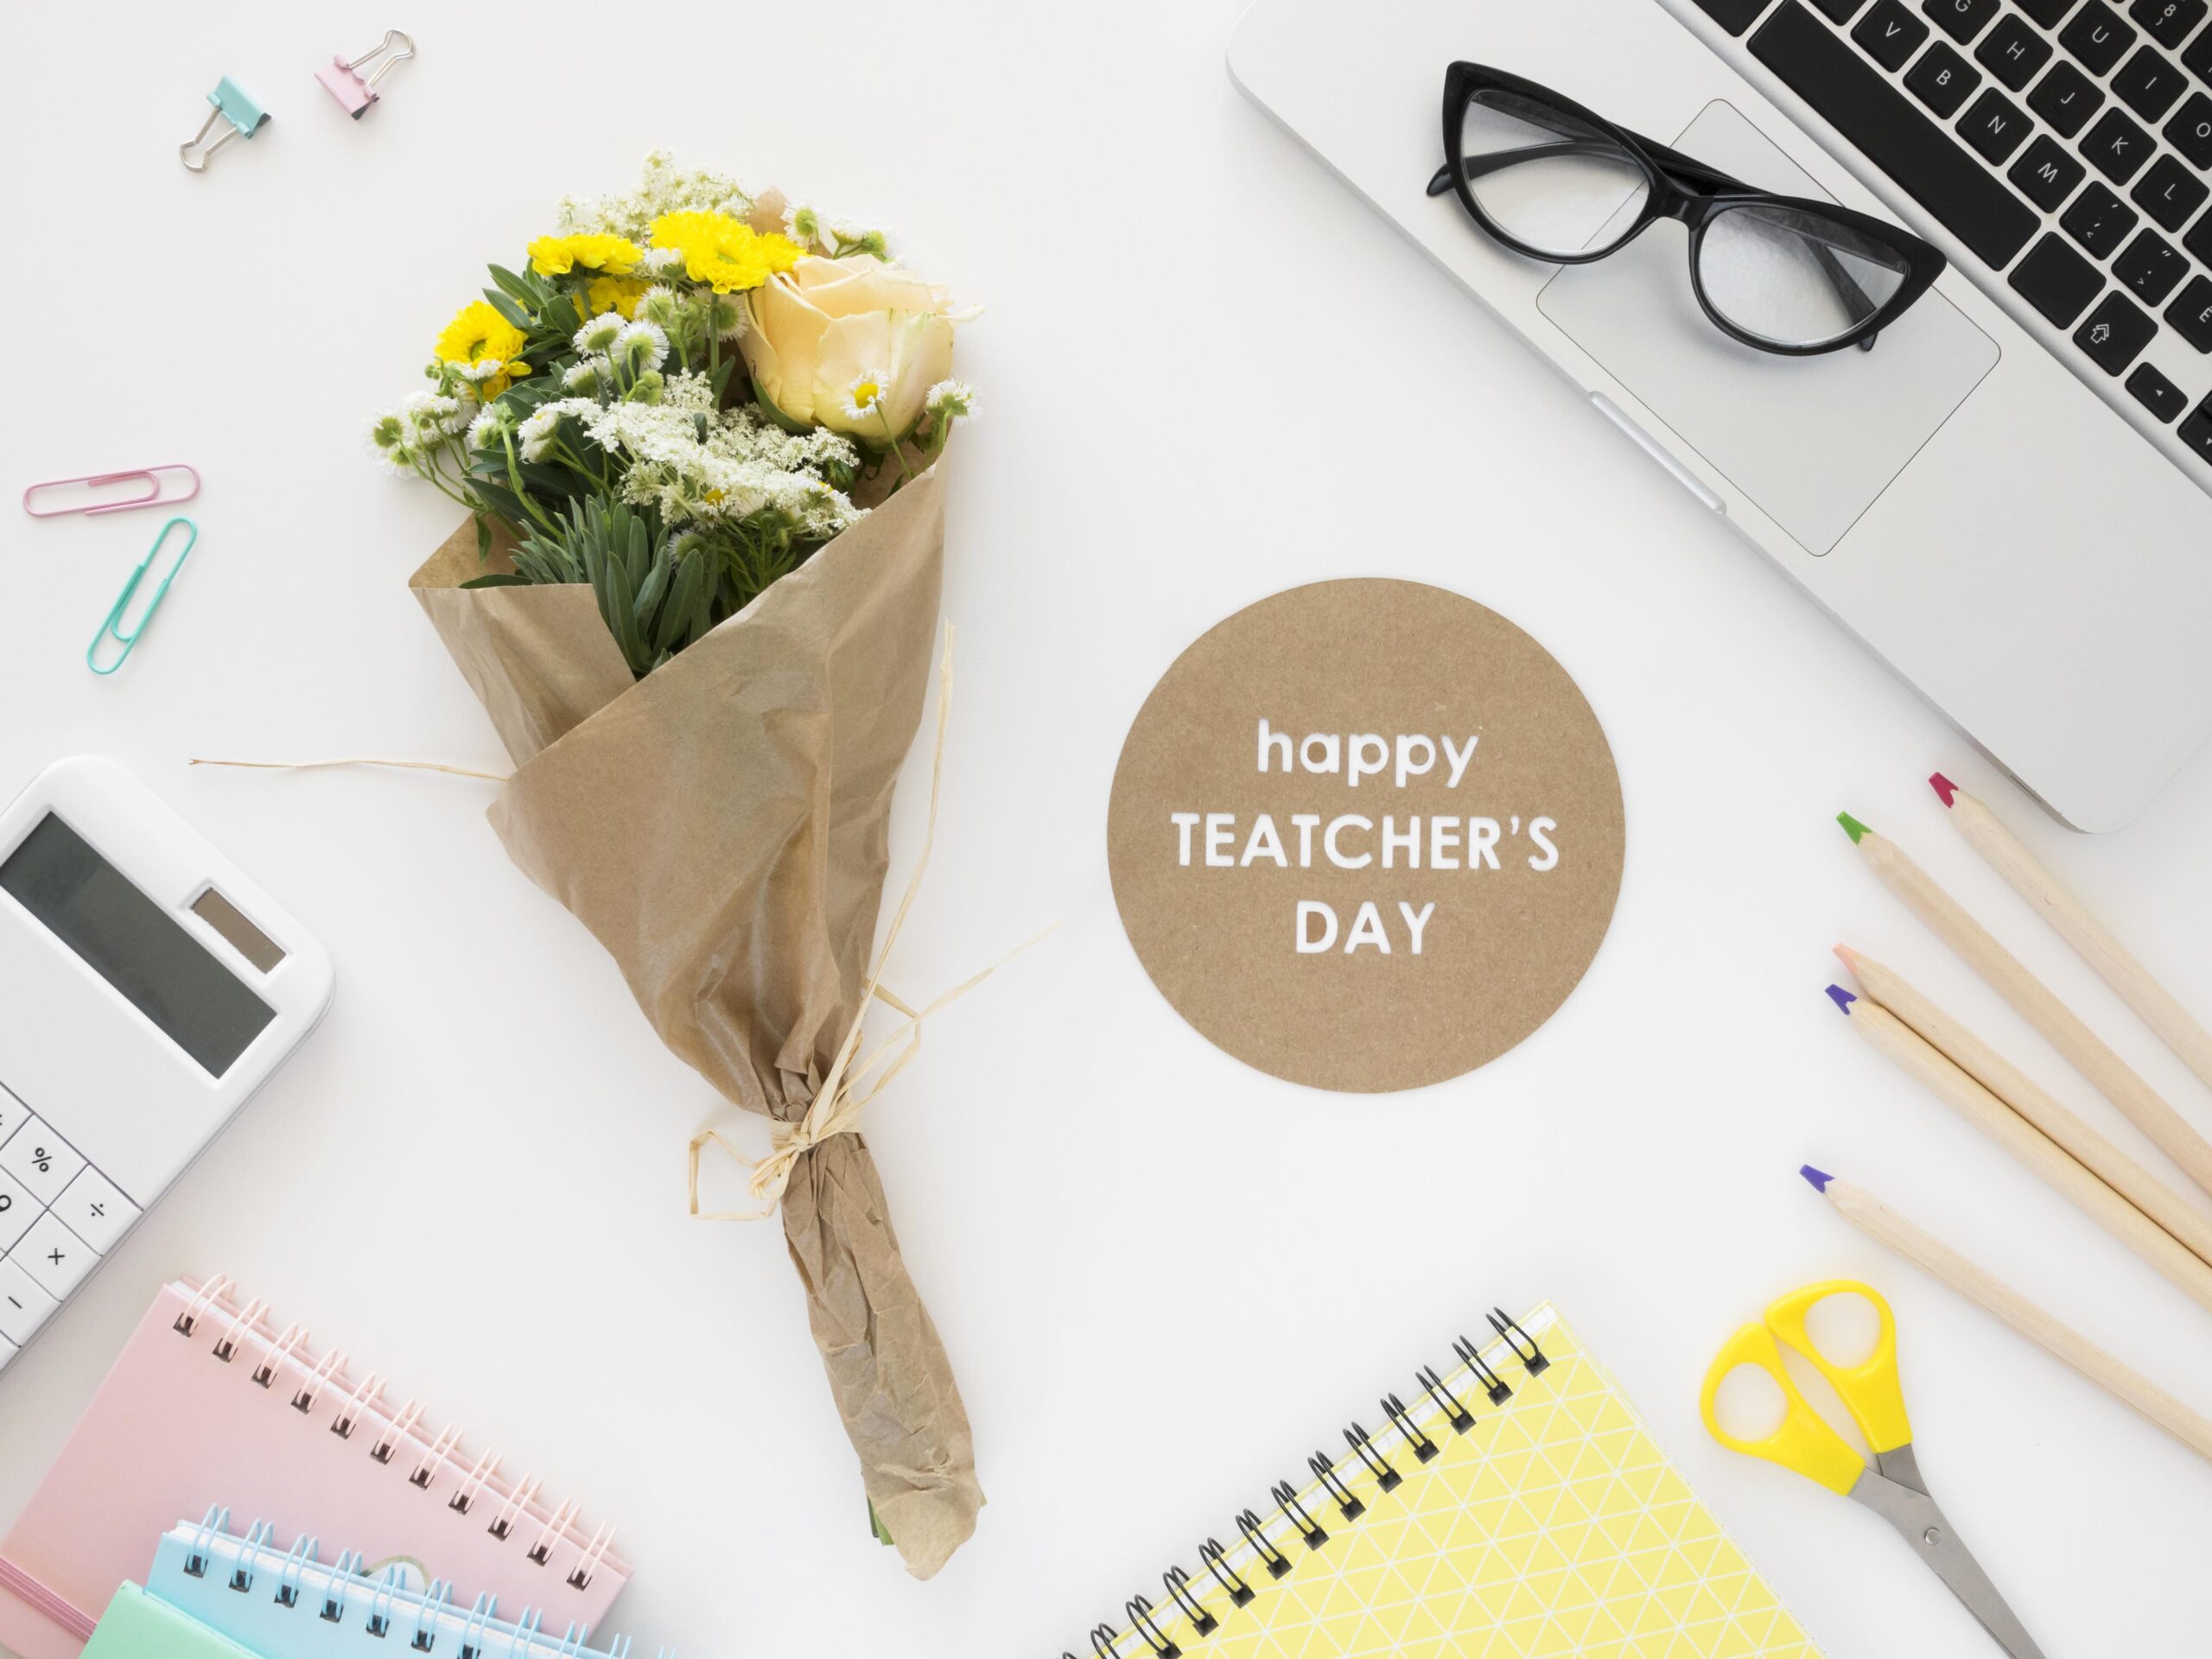 Teachers Day Gifts - Unique Ways to Celebrate Teacher's Day